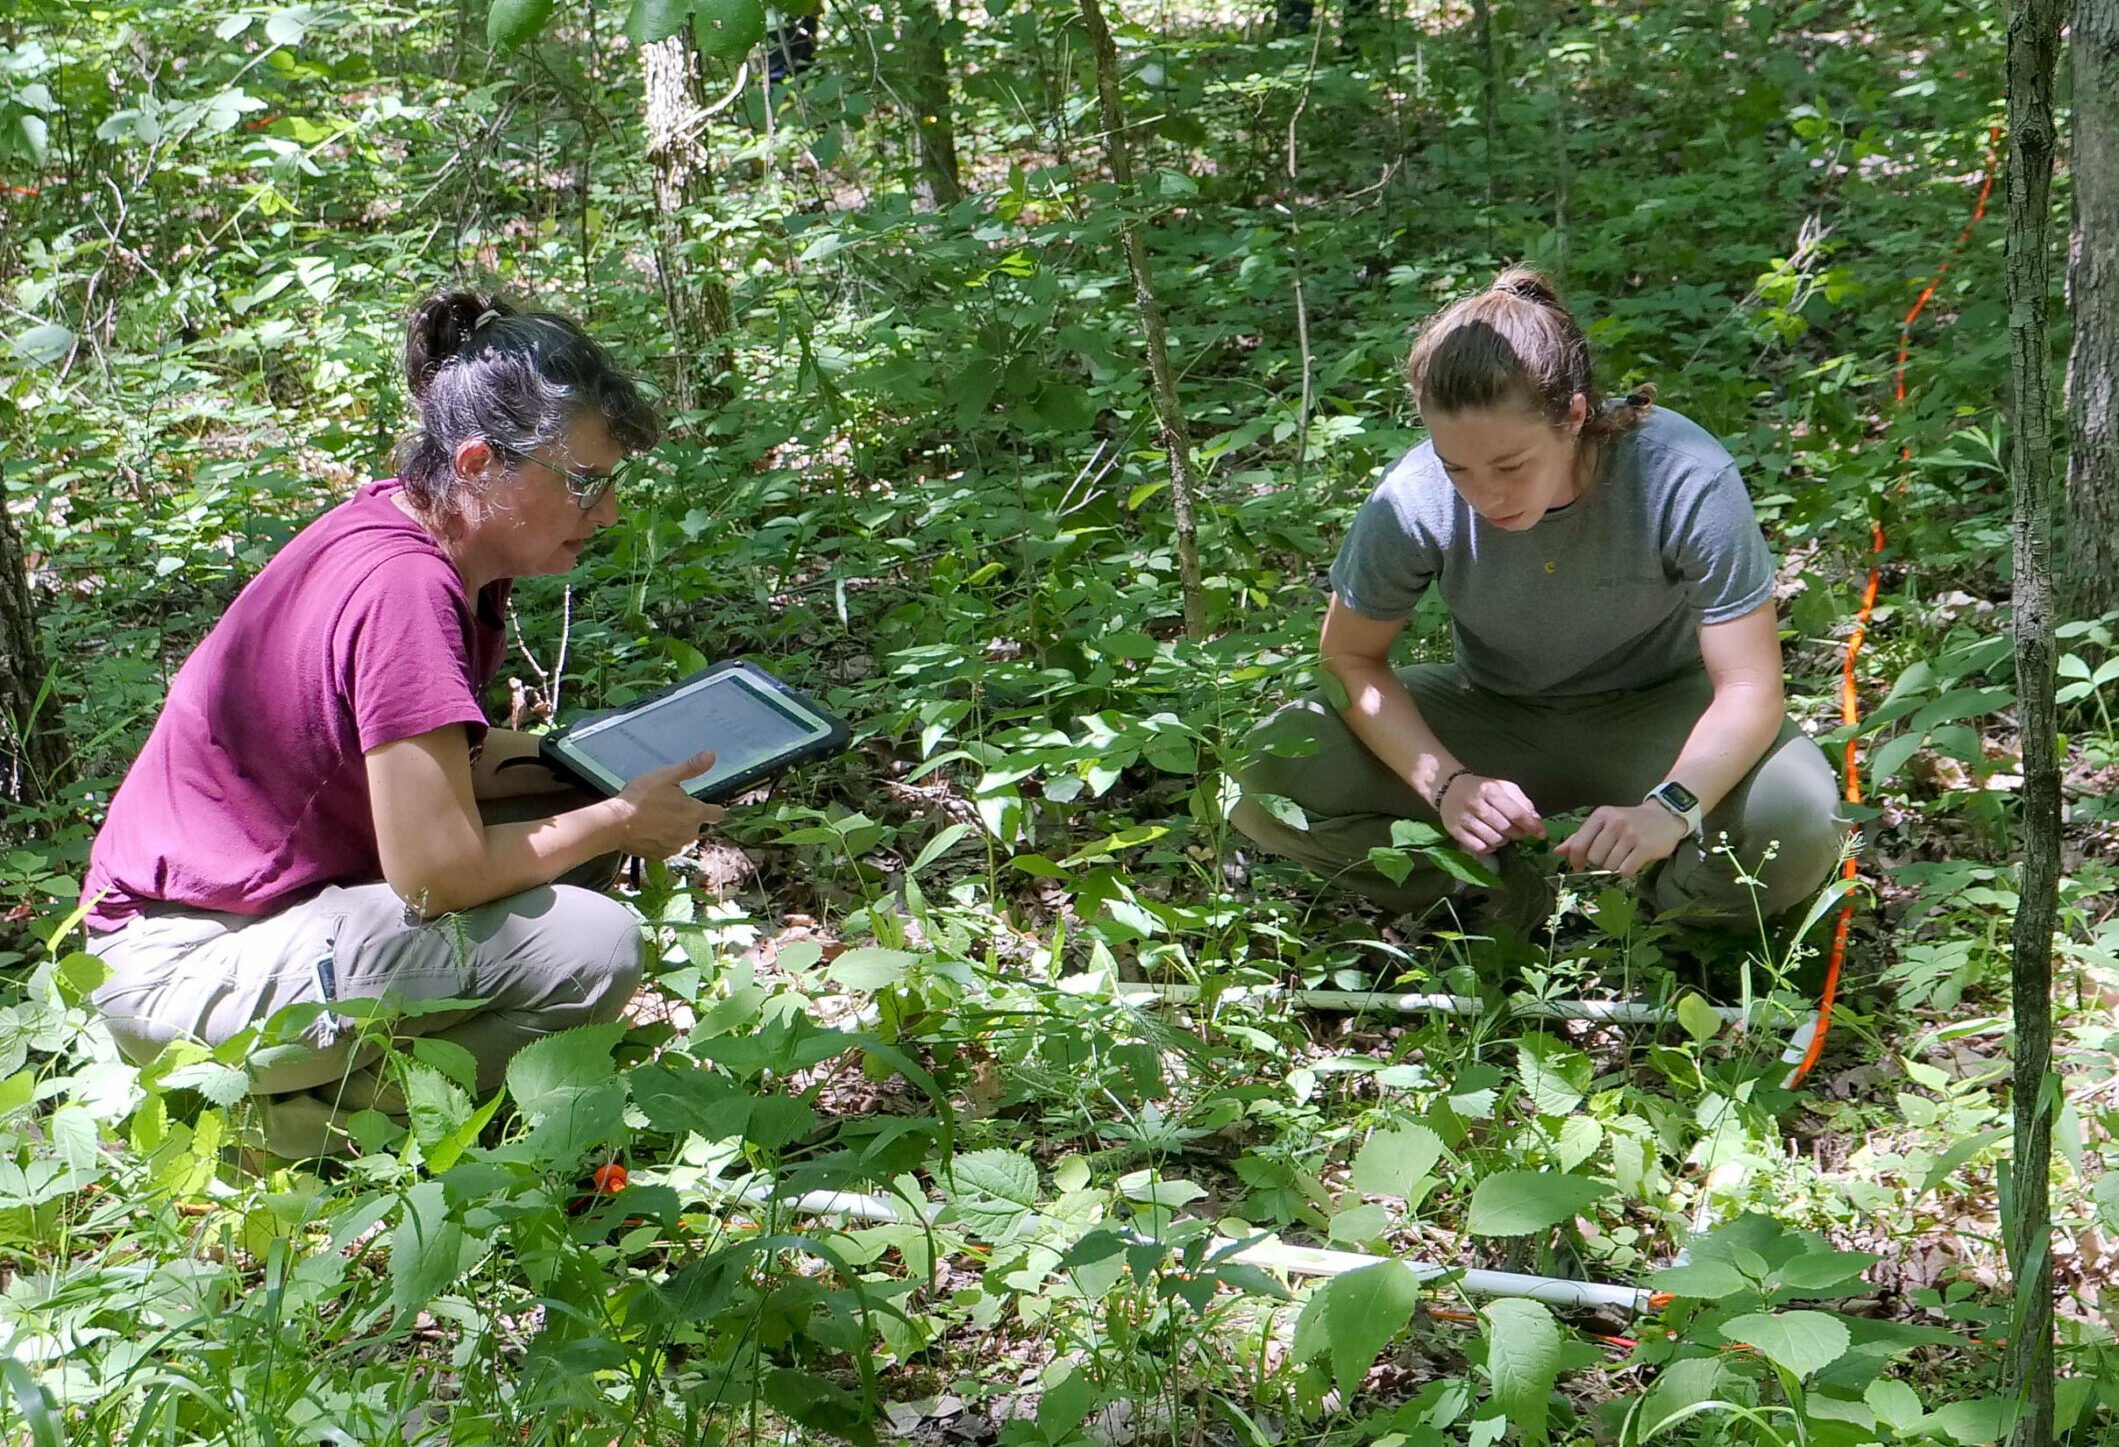 Two Greenacres Research employees recording vegetation observations in the woods